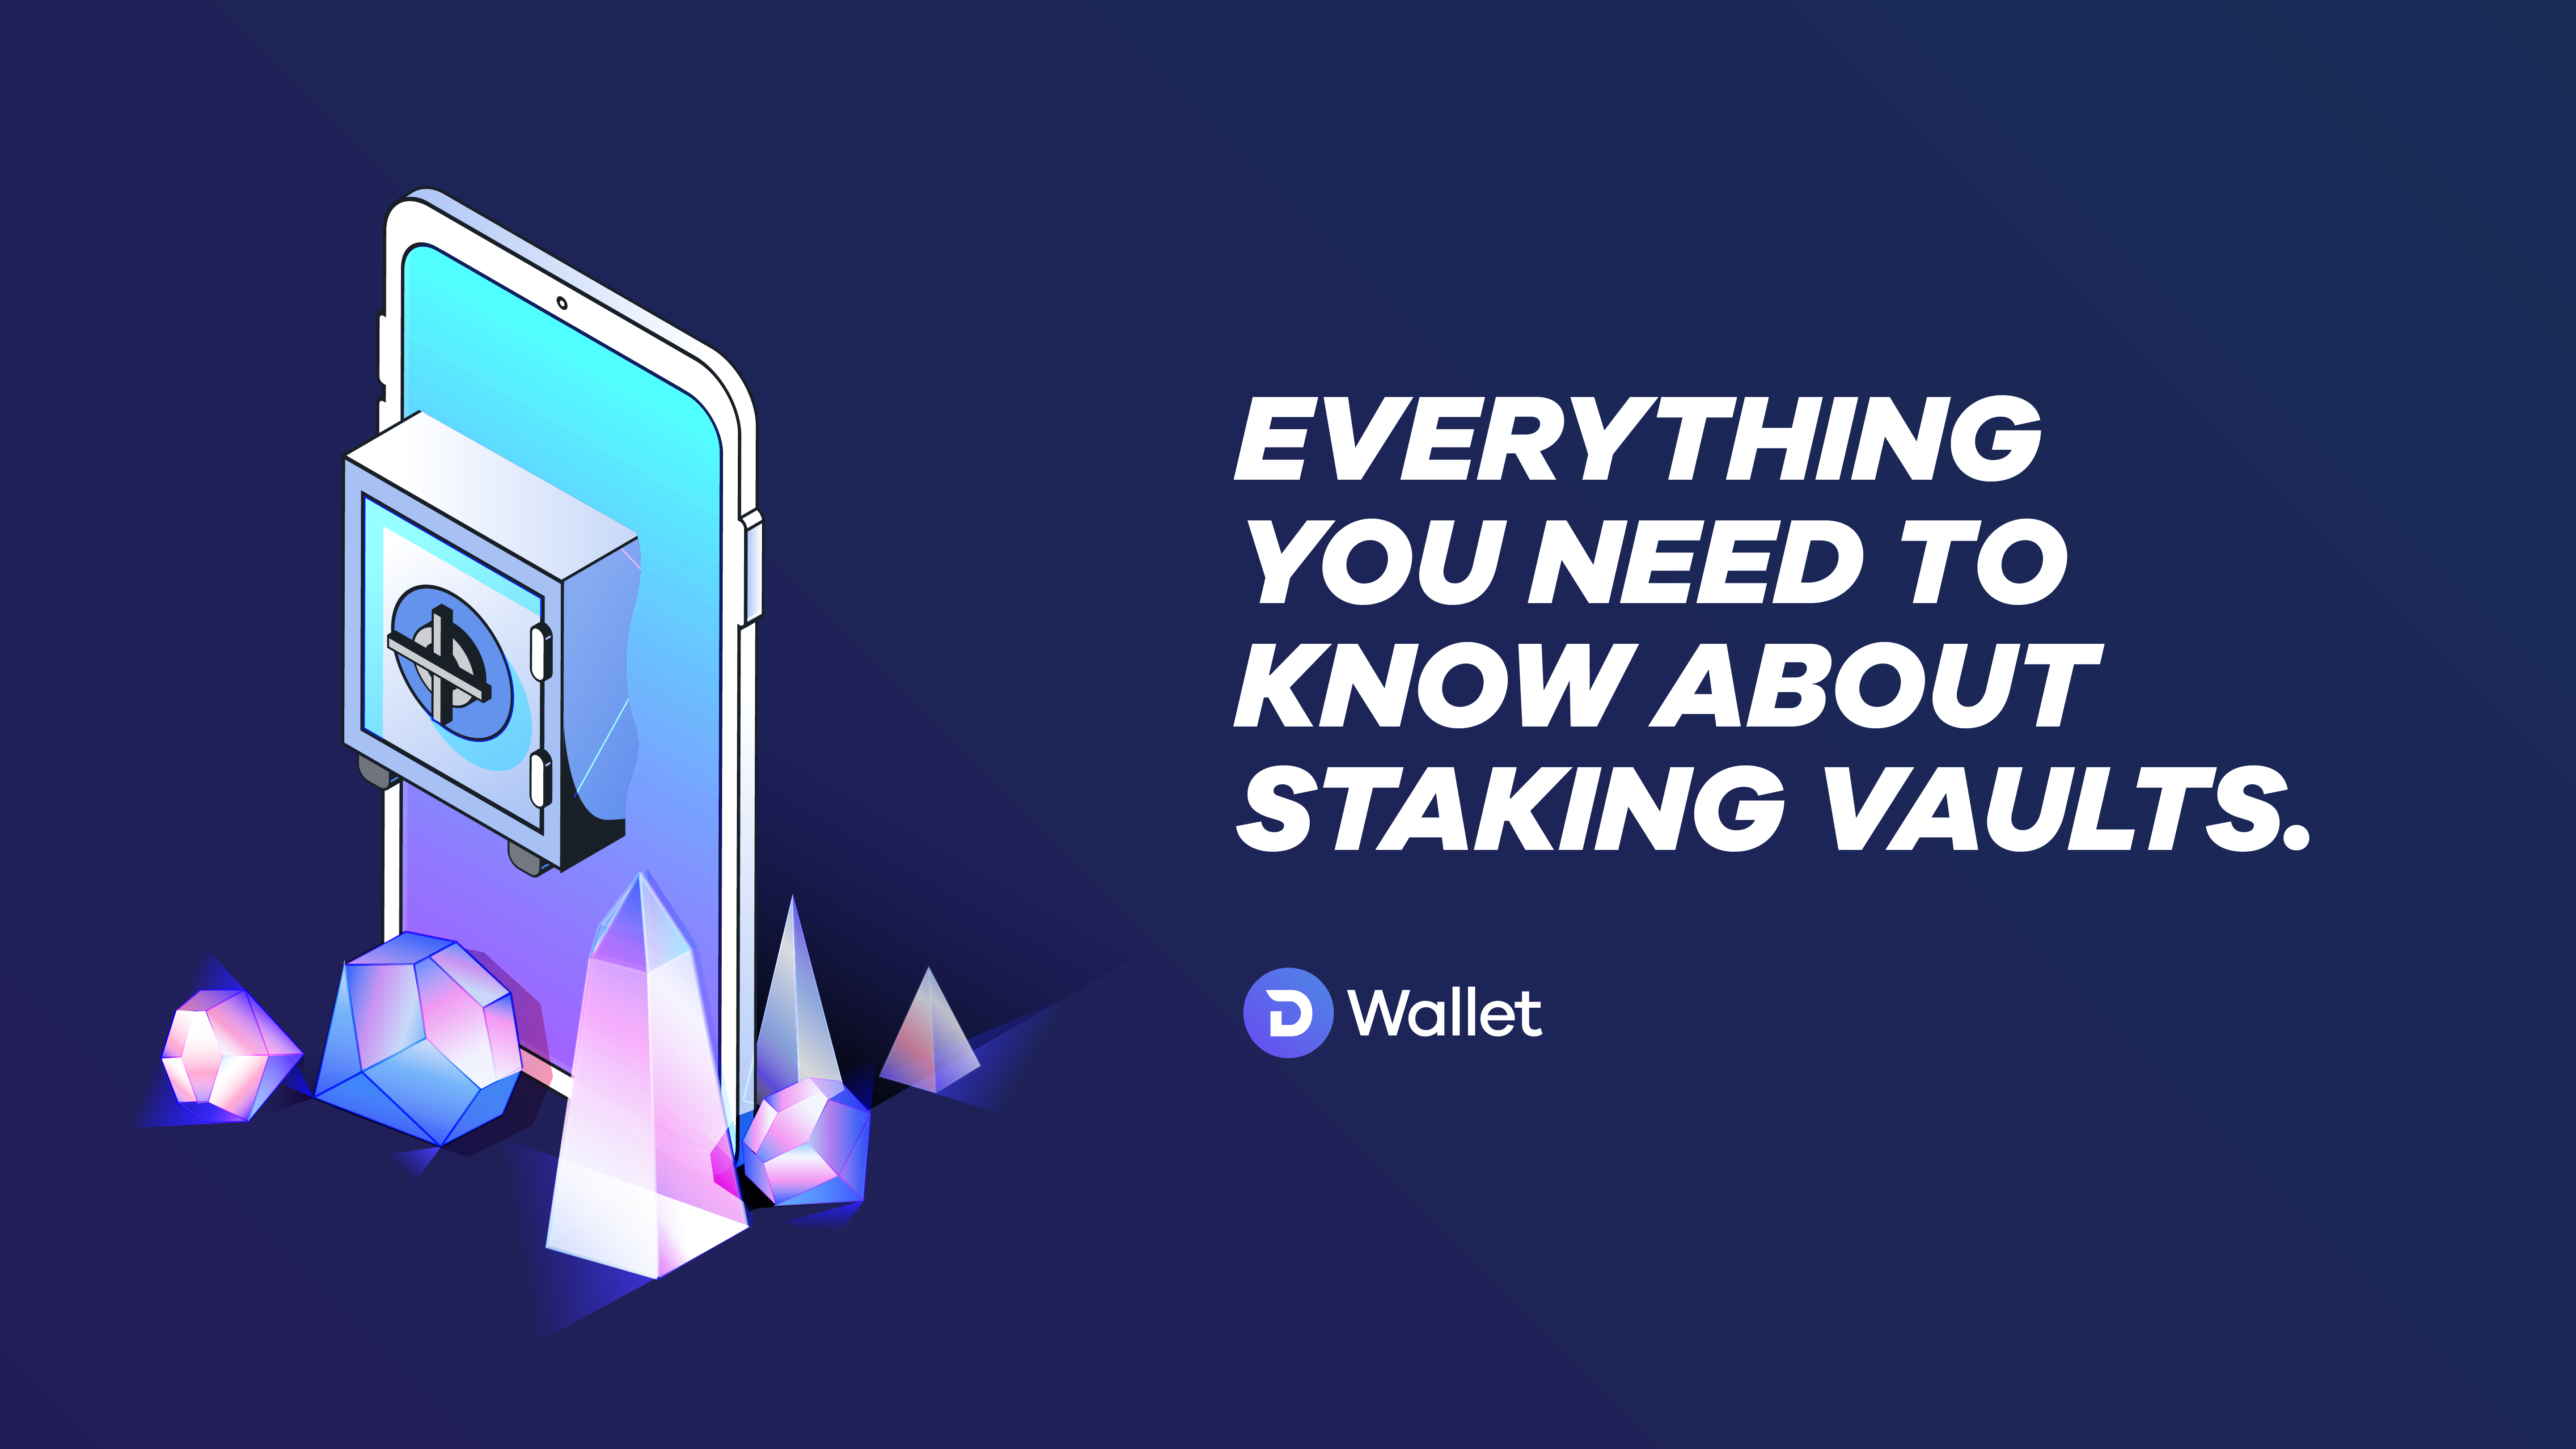 Divi mobile staking Vaults are here